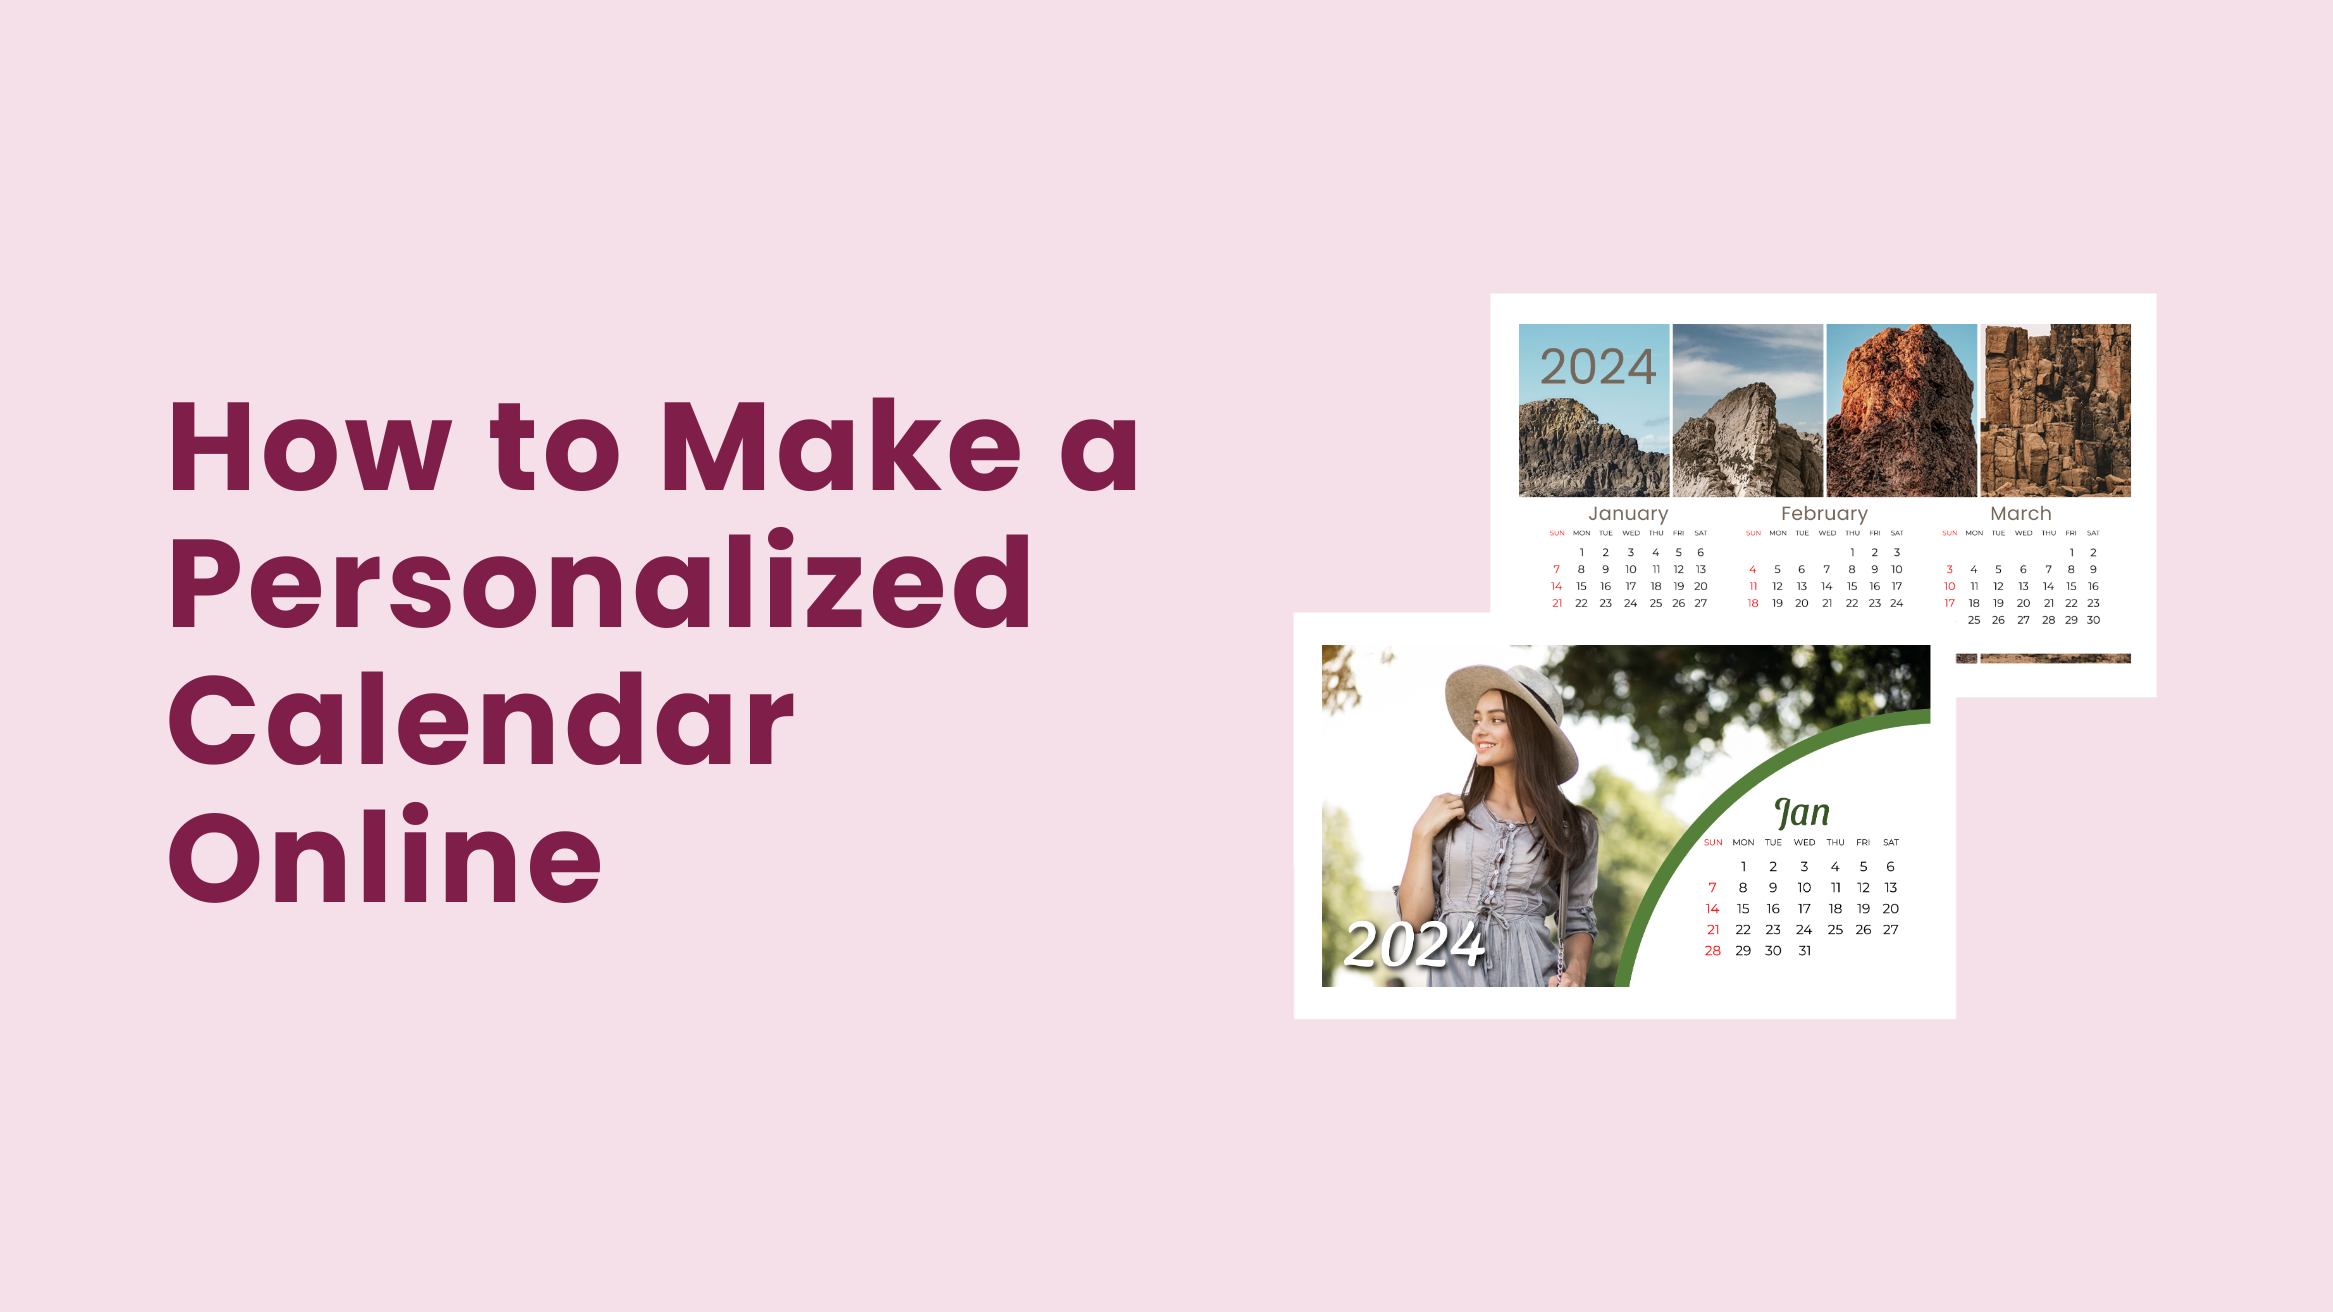 How to Make a Personalized Calendar Online